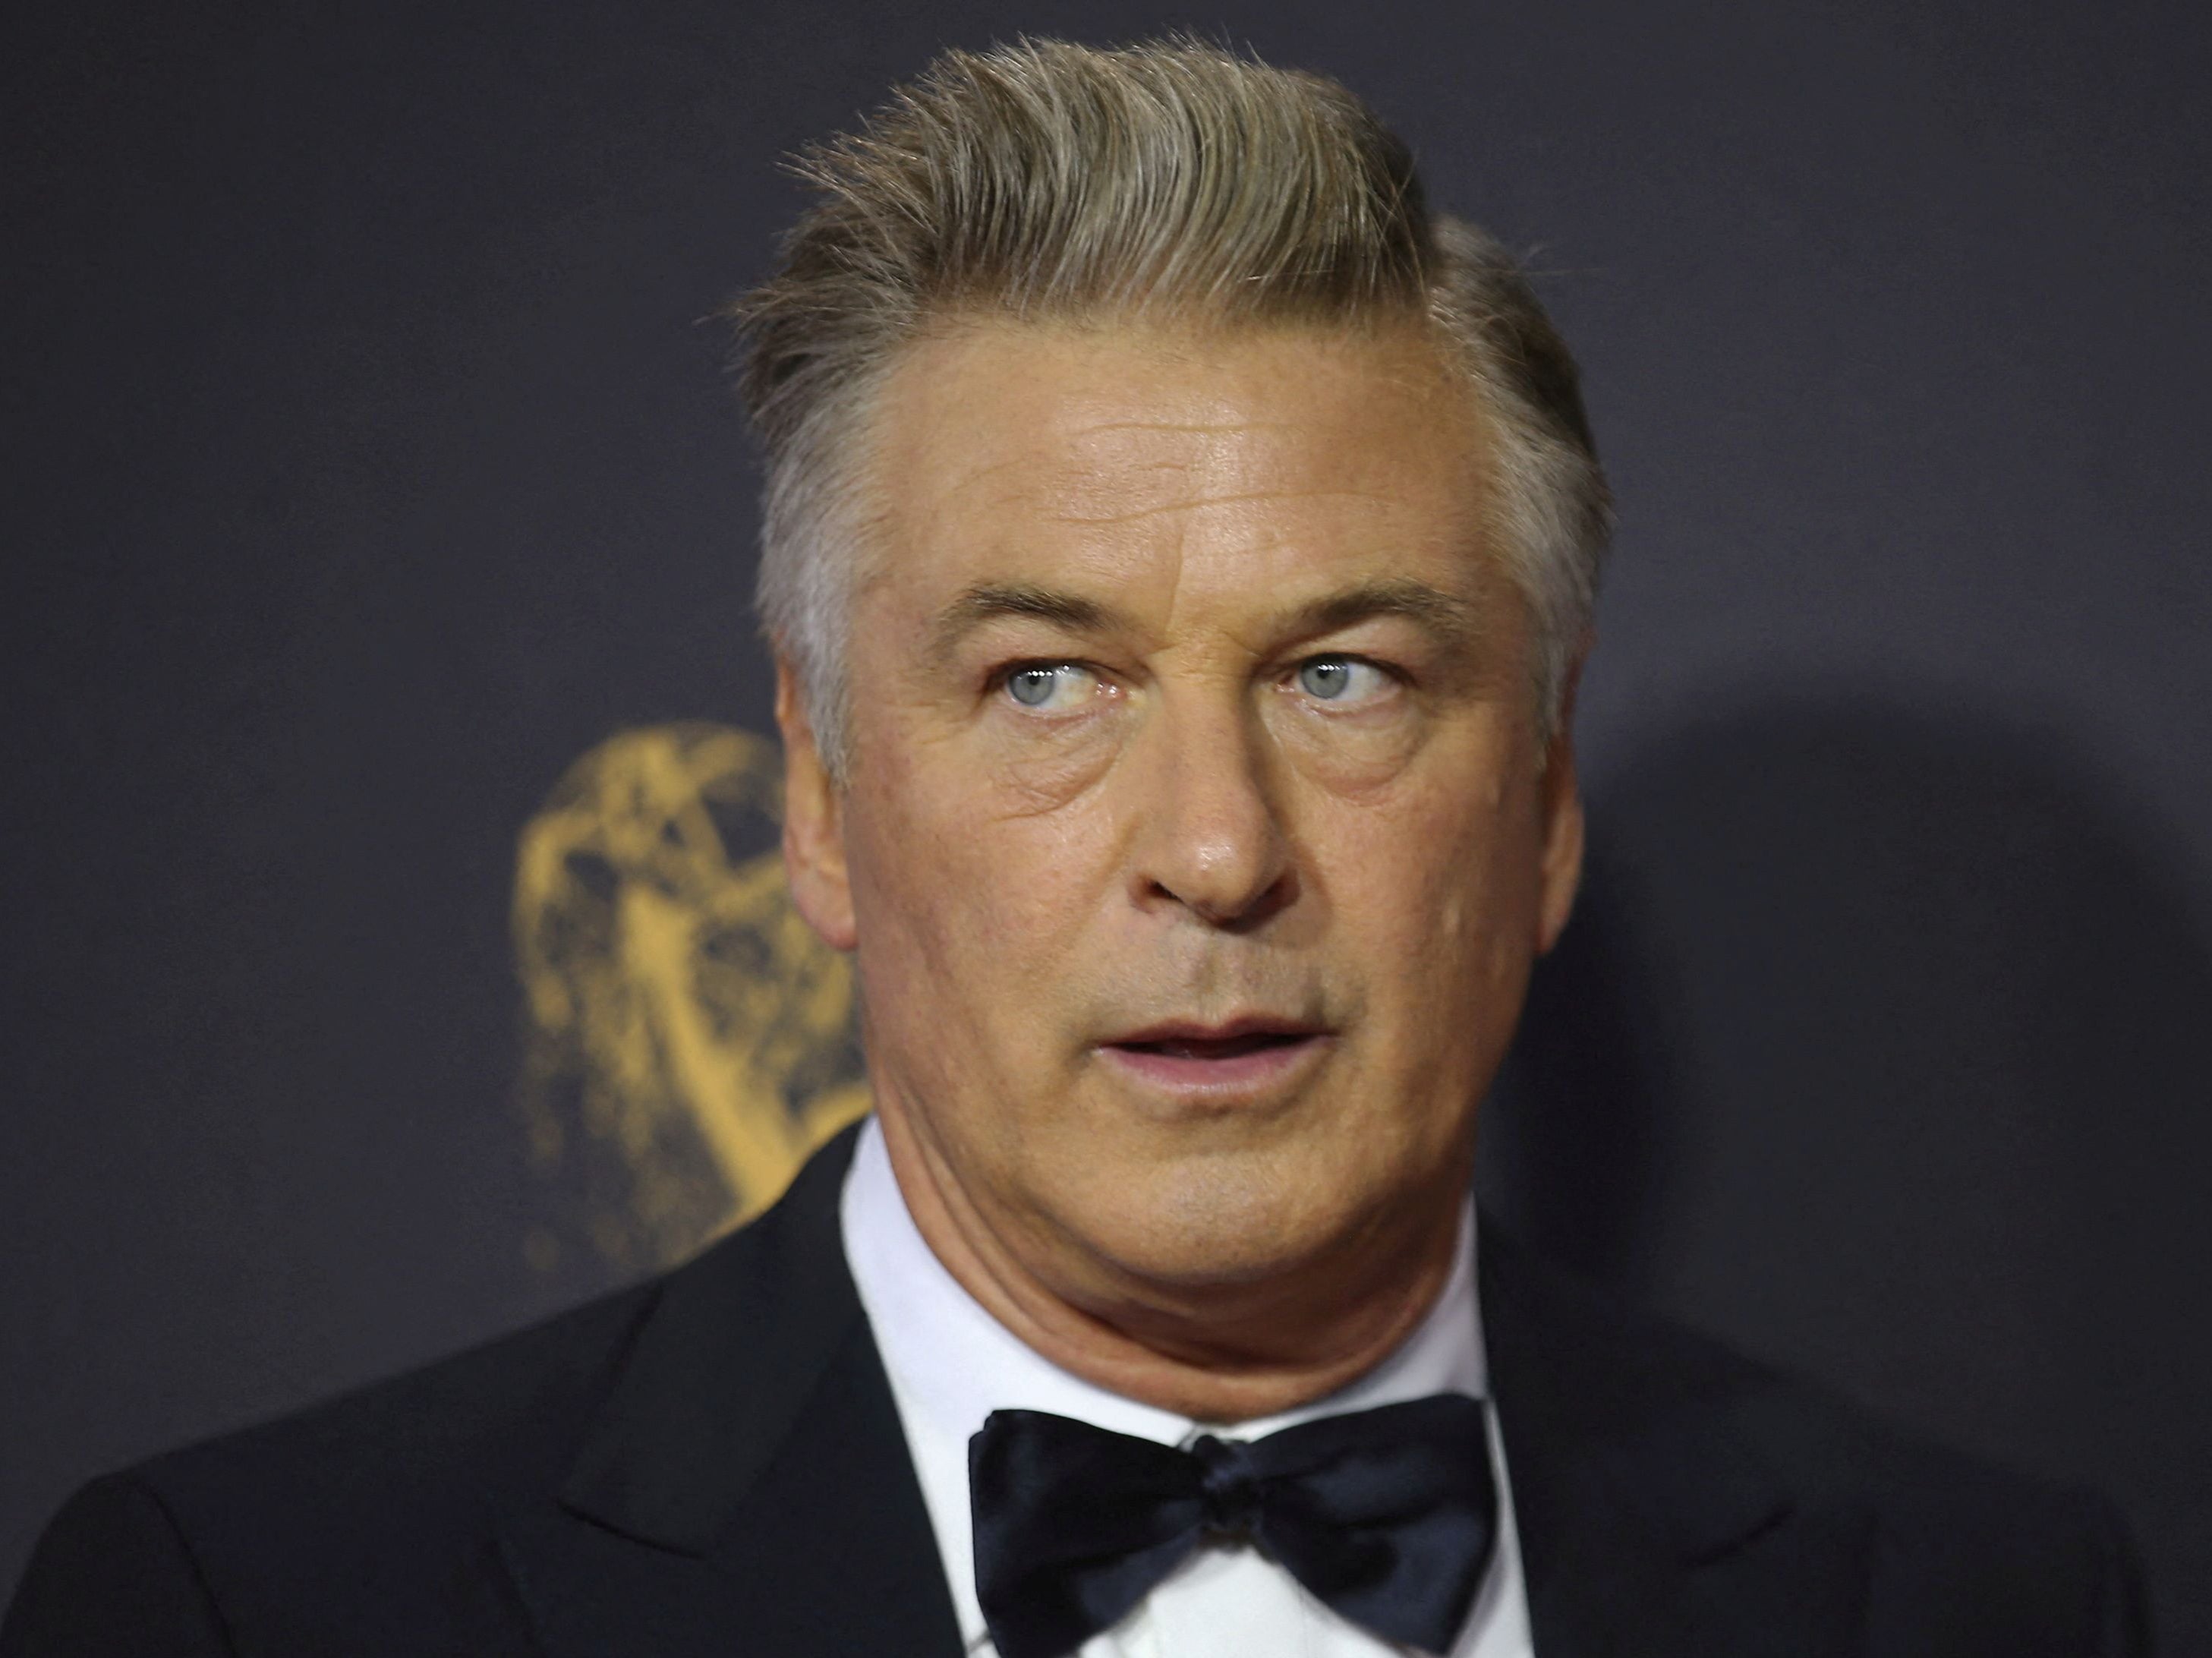 Alec Baldwin at the Emmy Awards in 2017